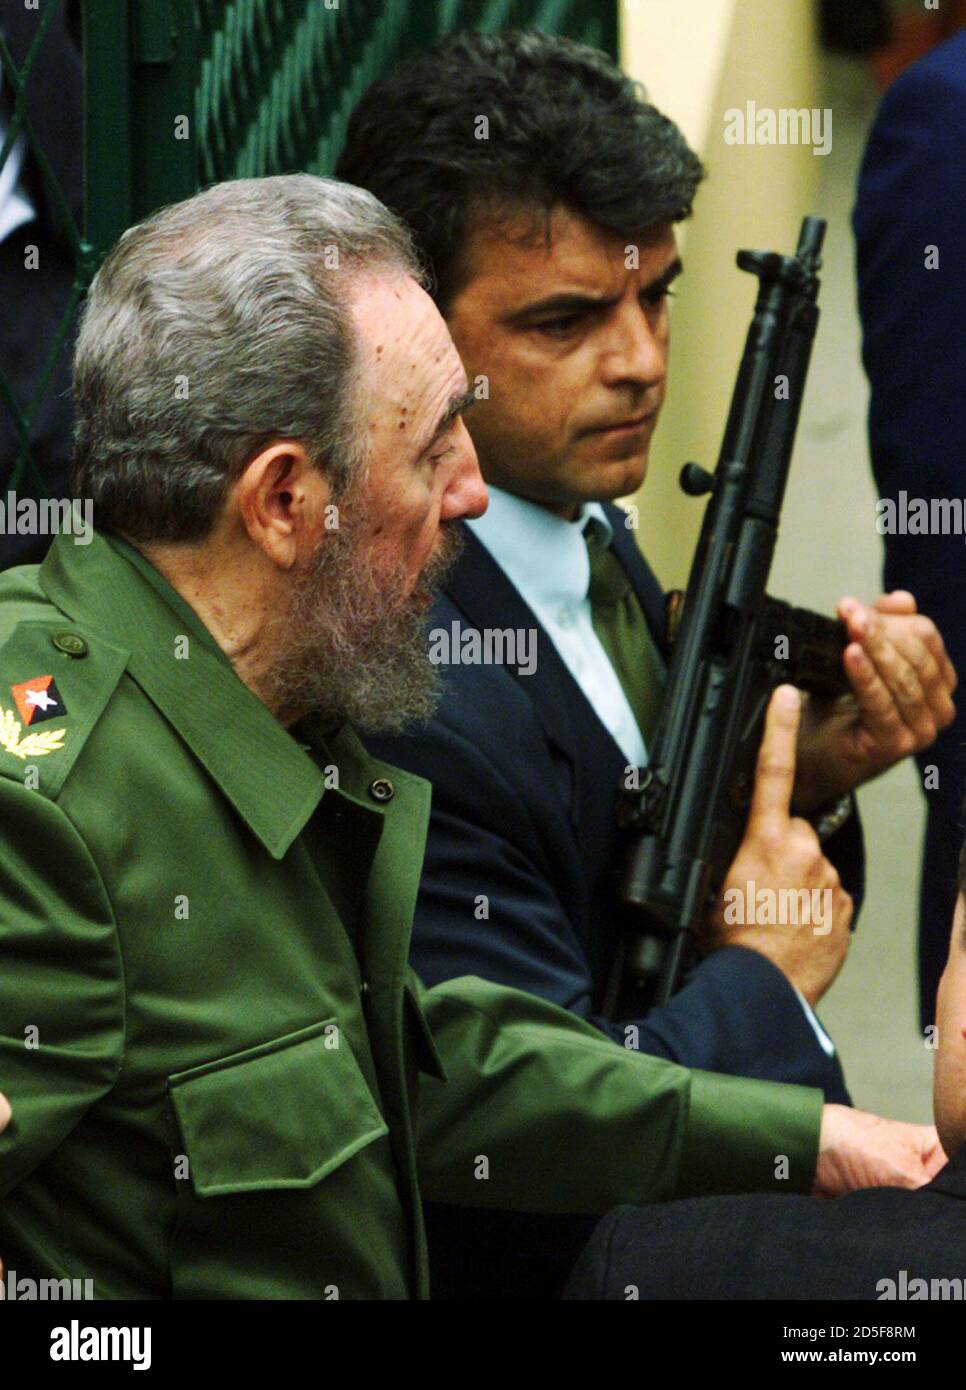 Cuban President Fidel Castro L Walks Past A Federal Police Officer Armed With An Mp 5 Machine Gun After Visiting A Health Clinic In The Town Of Niteroi Near Rio De Janeiro June